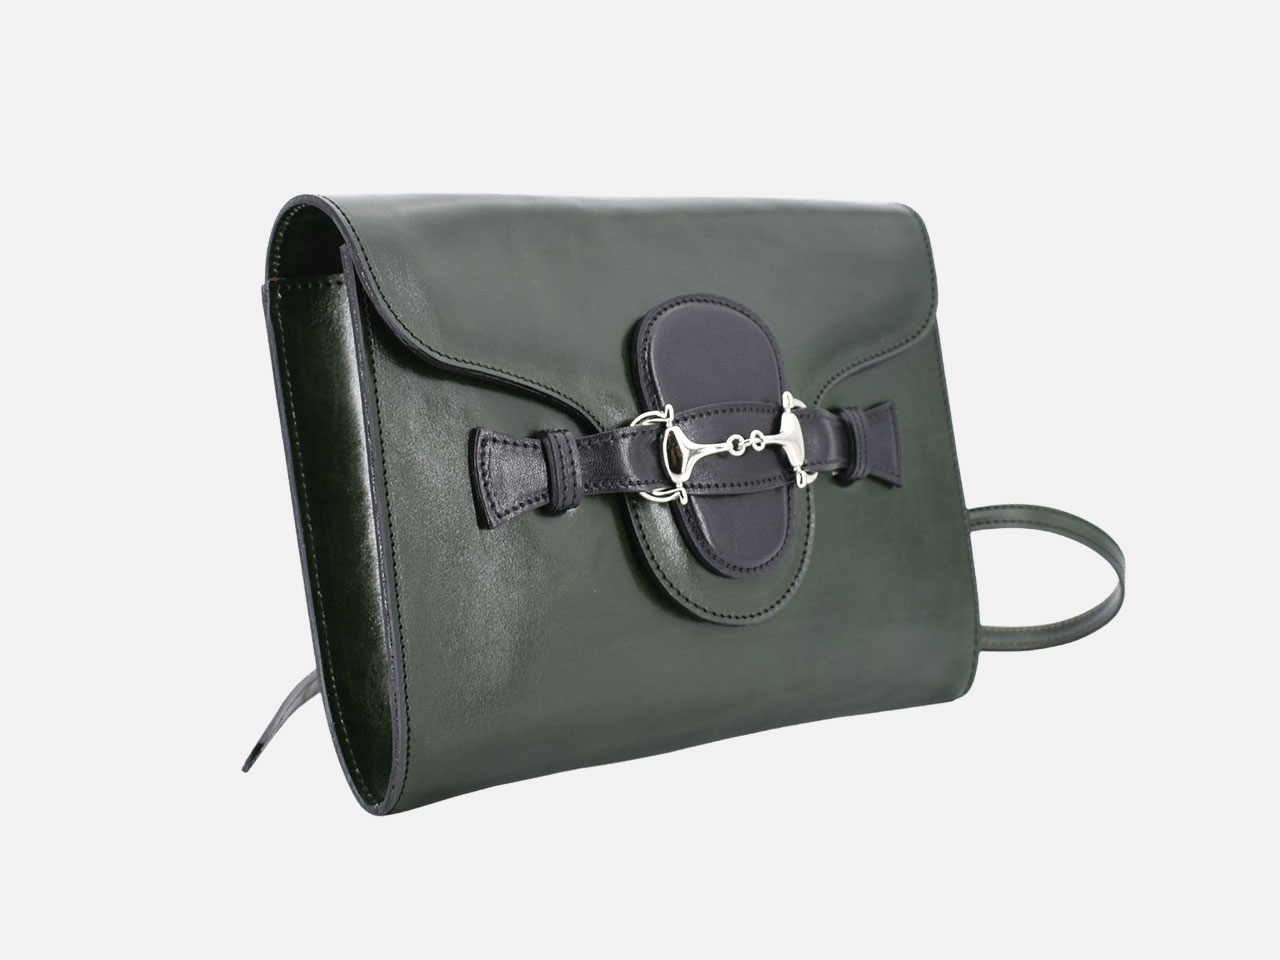 Fama, Italian leather purse designed and handcrafted in Rome by Riccardo Mancini